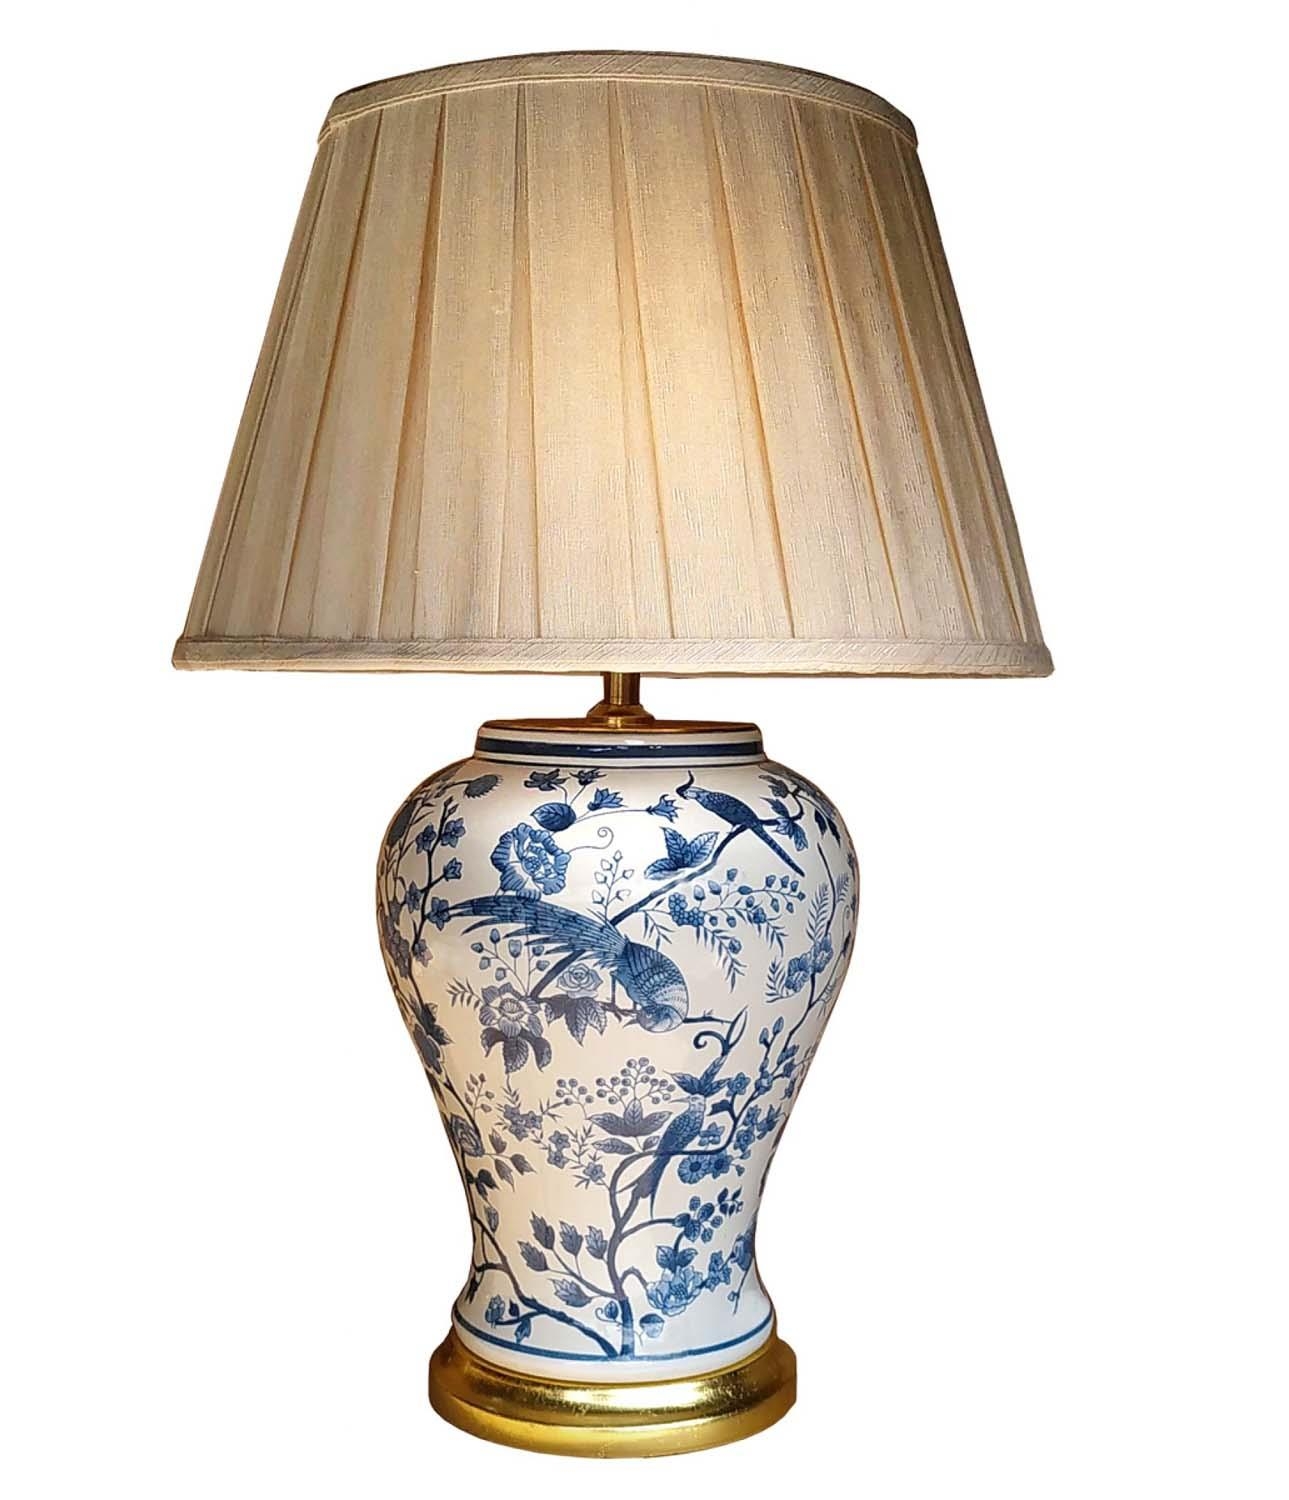 TABLE LAMP, 67cm H, Chinese Export style blue and white ceramic pleated shade.